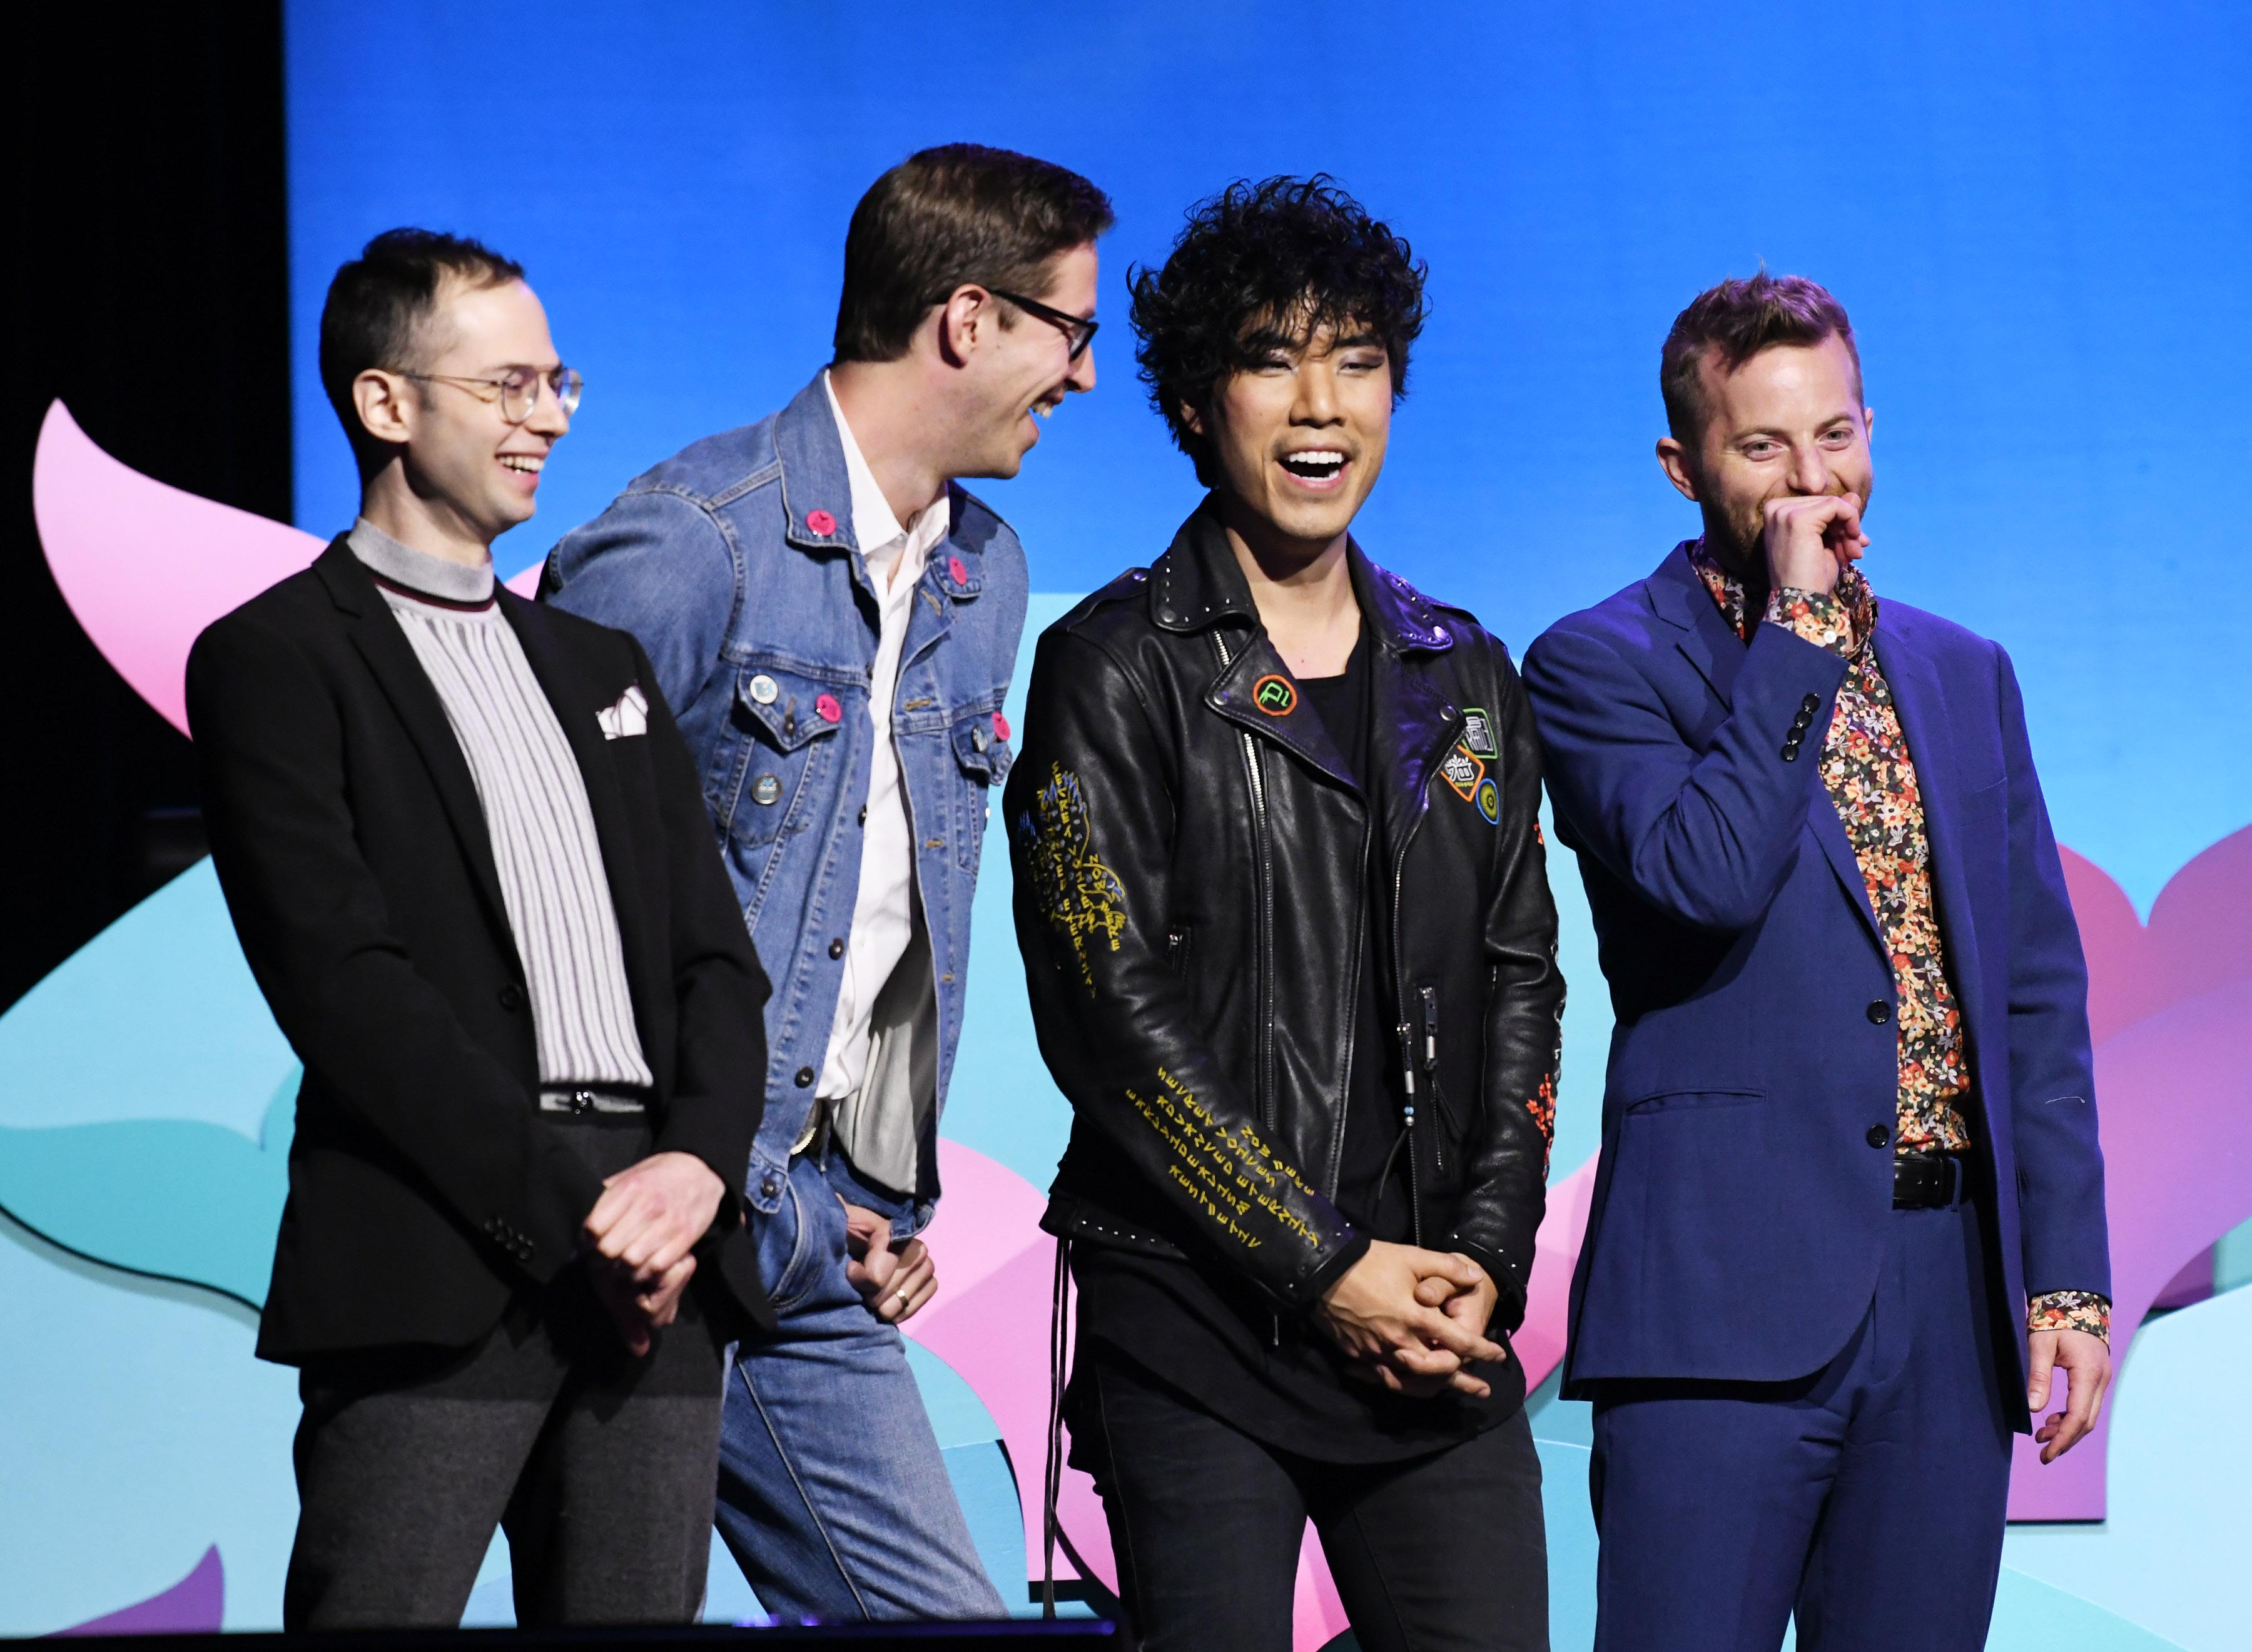 NEW YORK, NEW YORK - MAY 05:  Zach Kornfeld, Keith Habersberger, Eugene Lee Yang, and Ned Fulmer speak onstage during the 11th Annual Shorty Awards on May 05, 2019 at PlayStation Theater in New York City. (Photo by Noam Galai/Getty Images for Shorty Awards)